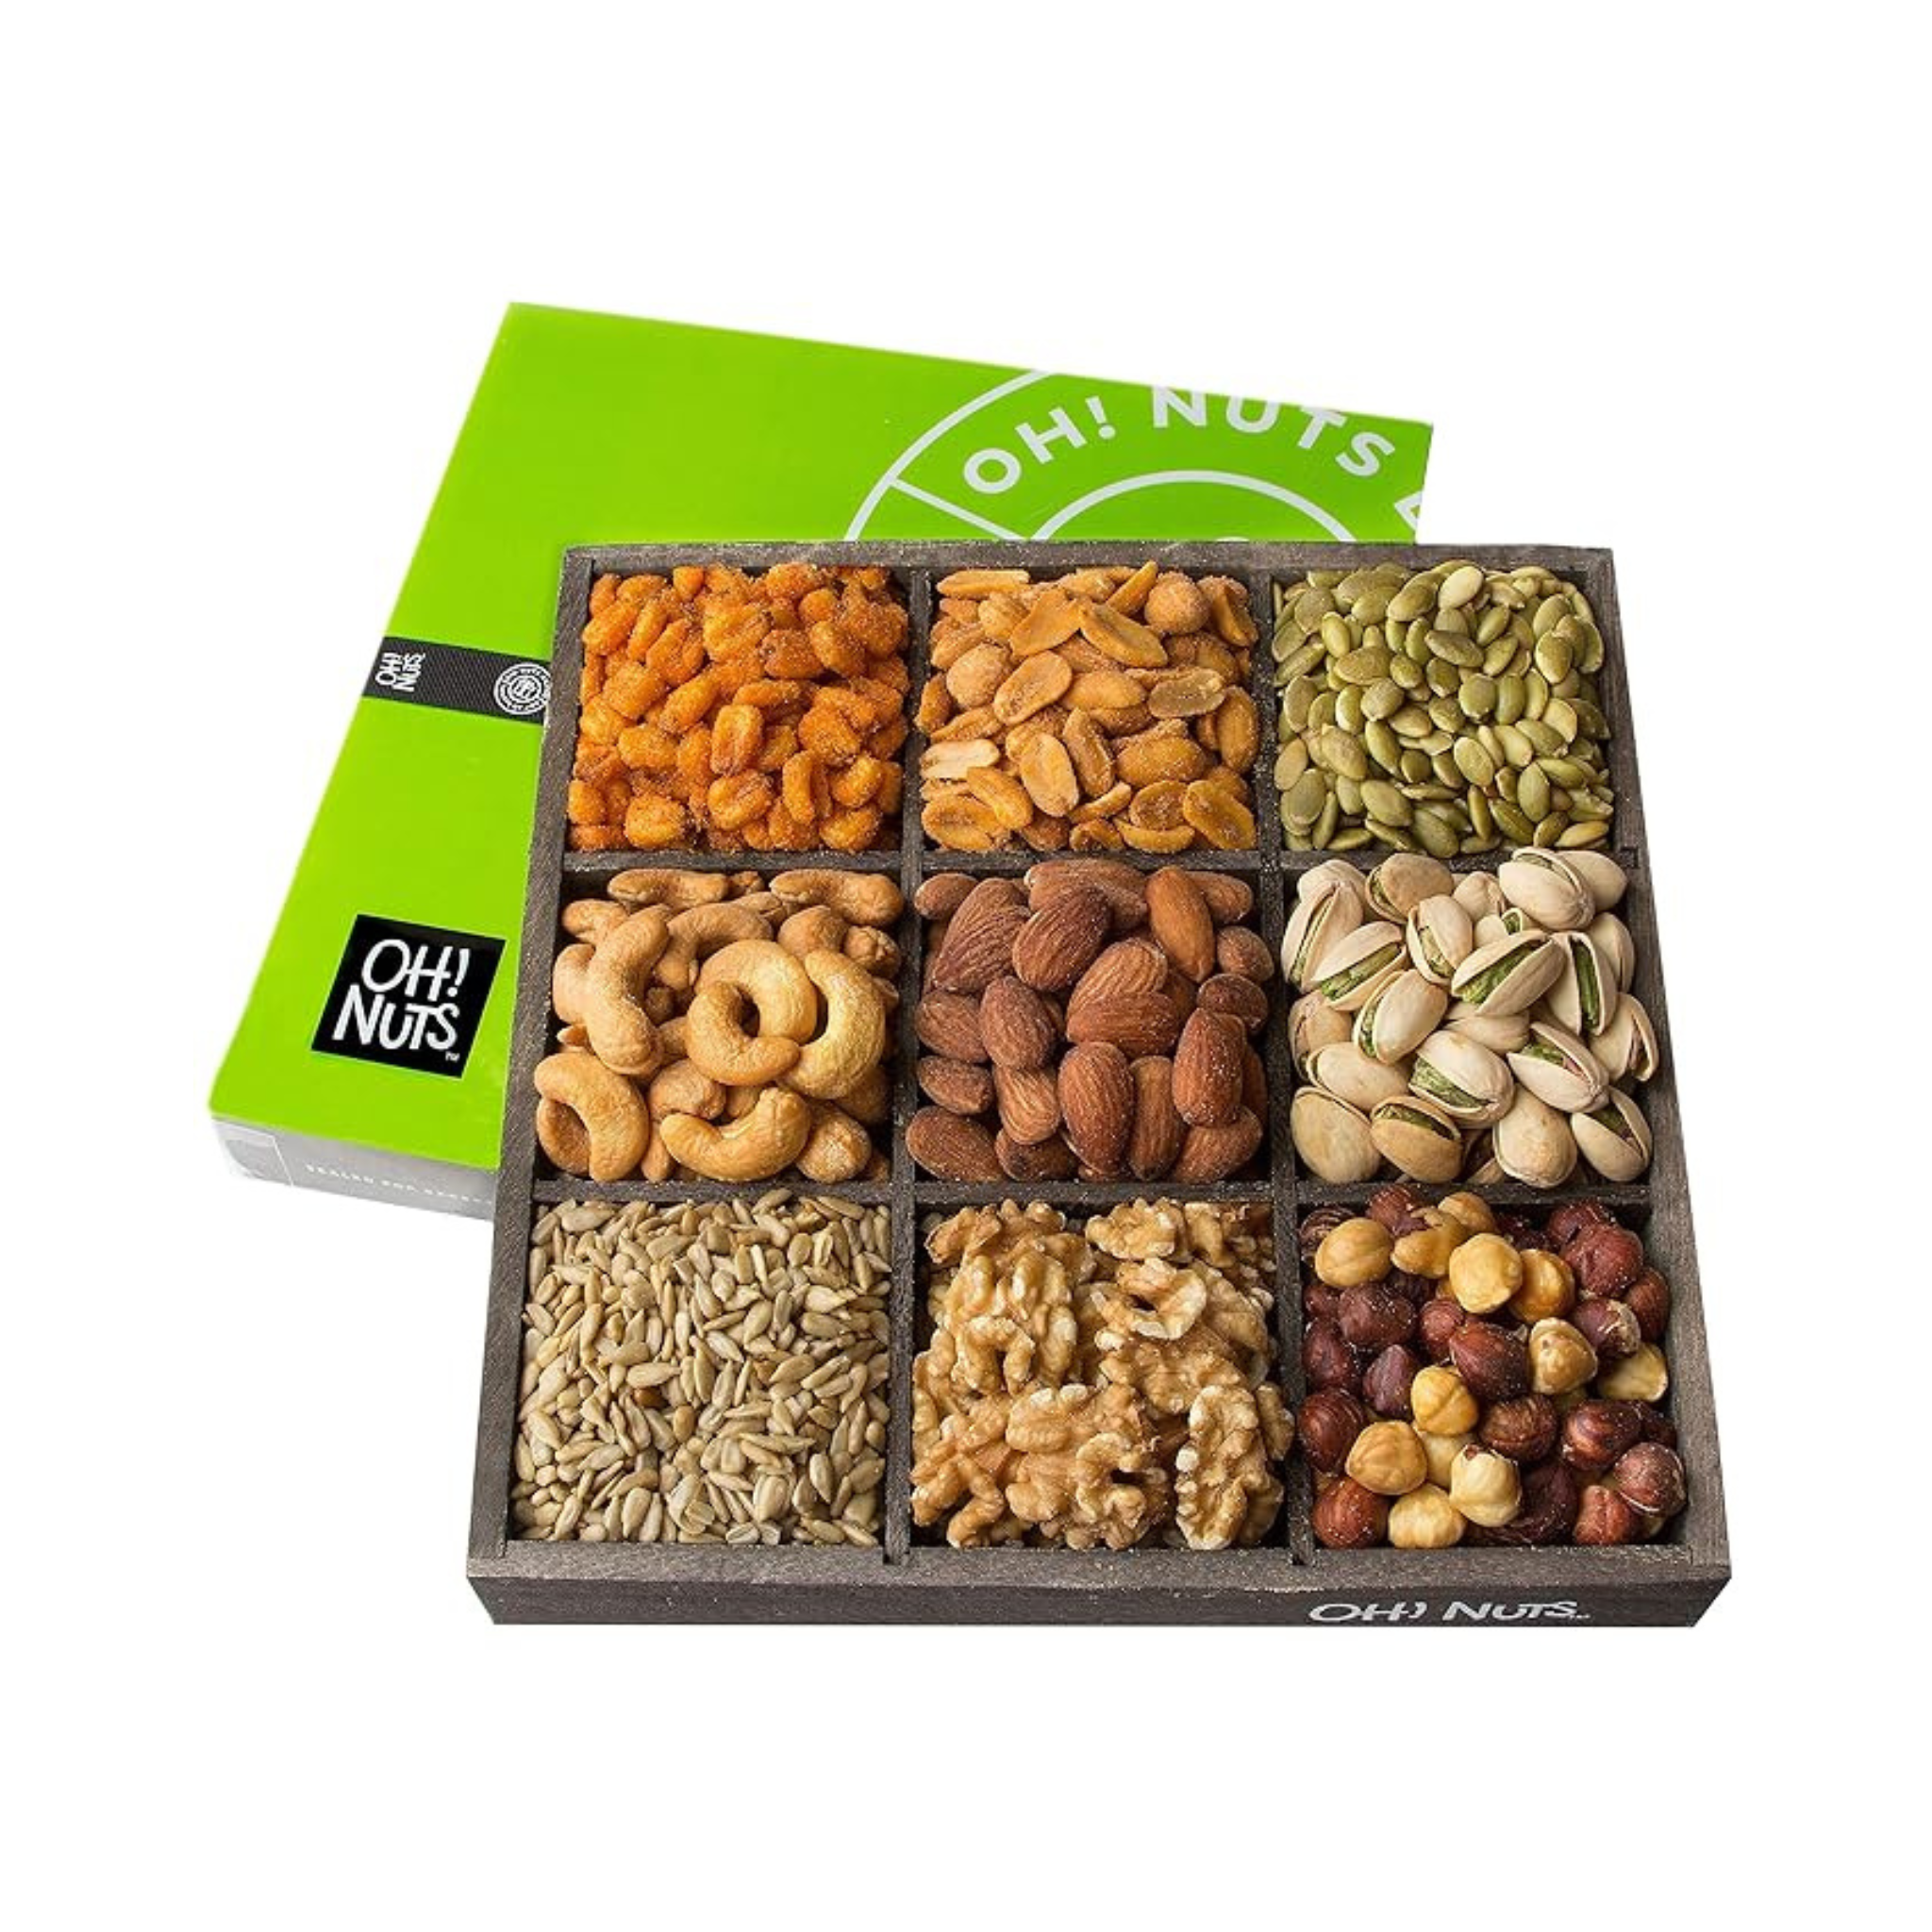 Oh! Nuts 9 Variety Mixed Nuts Gift Basket